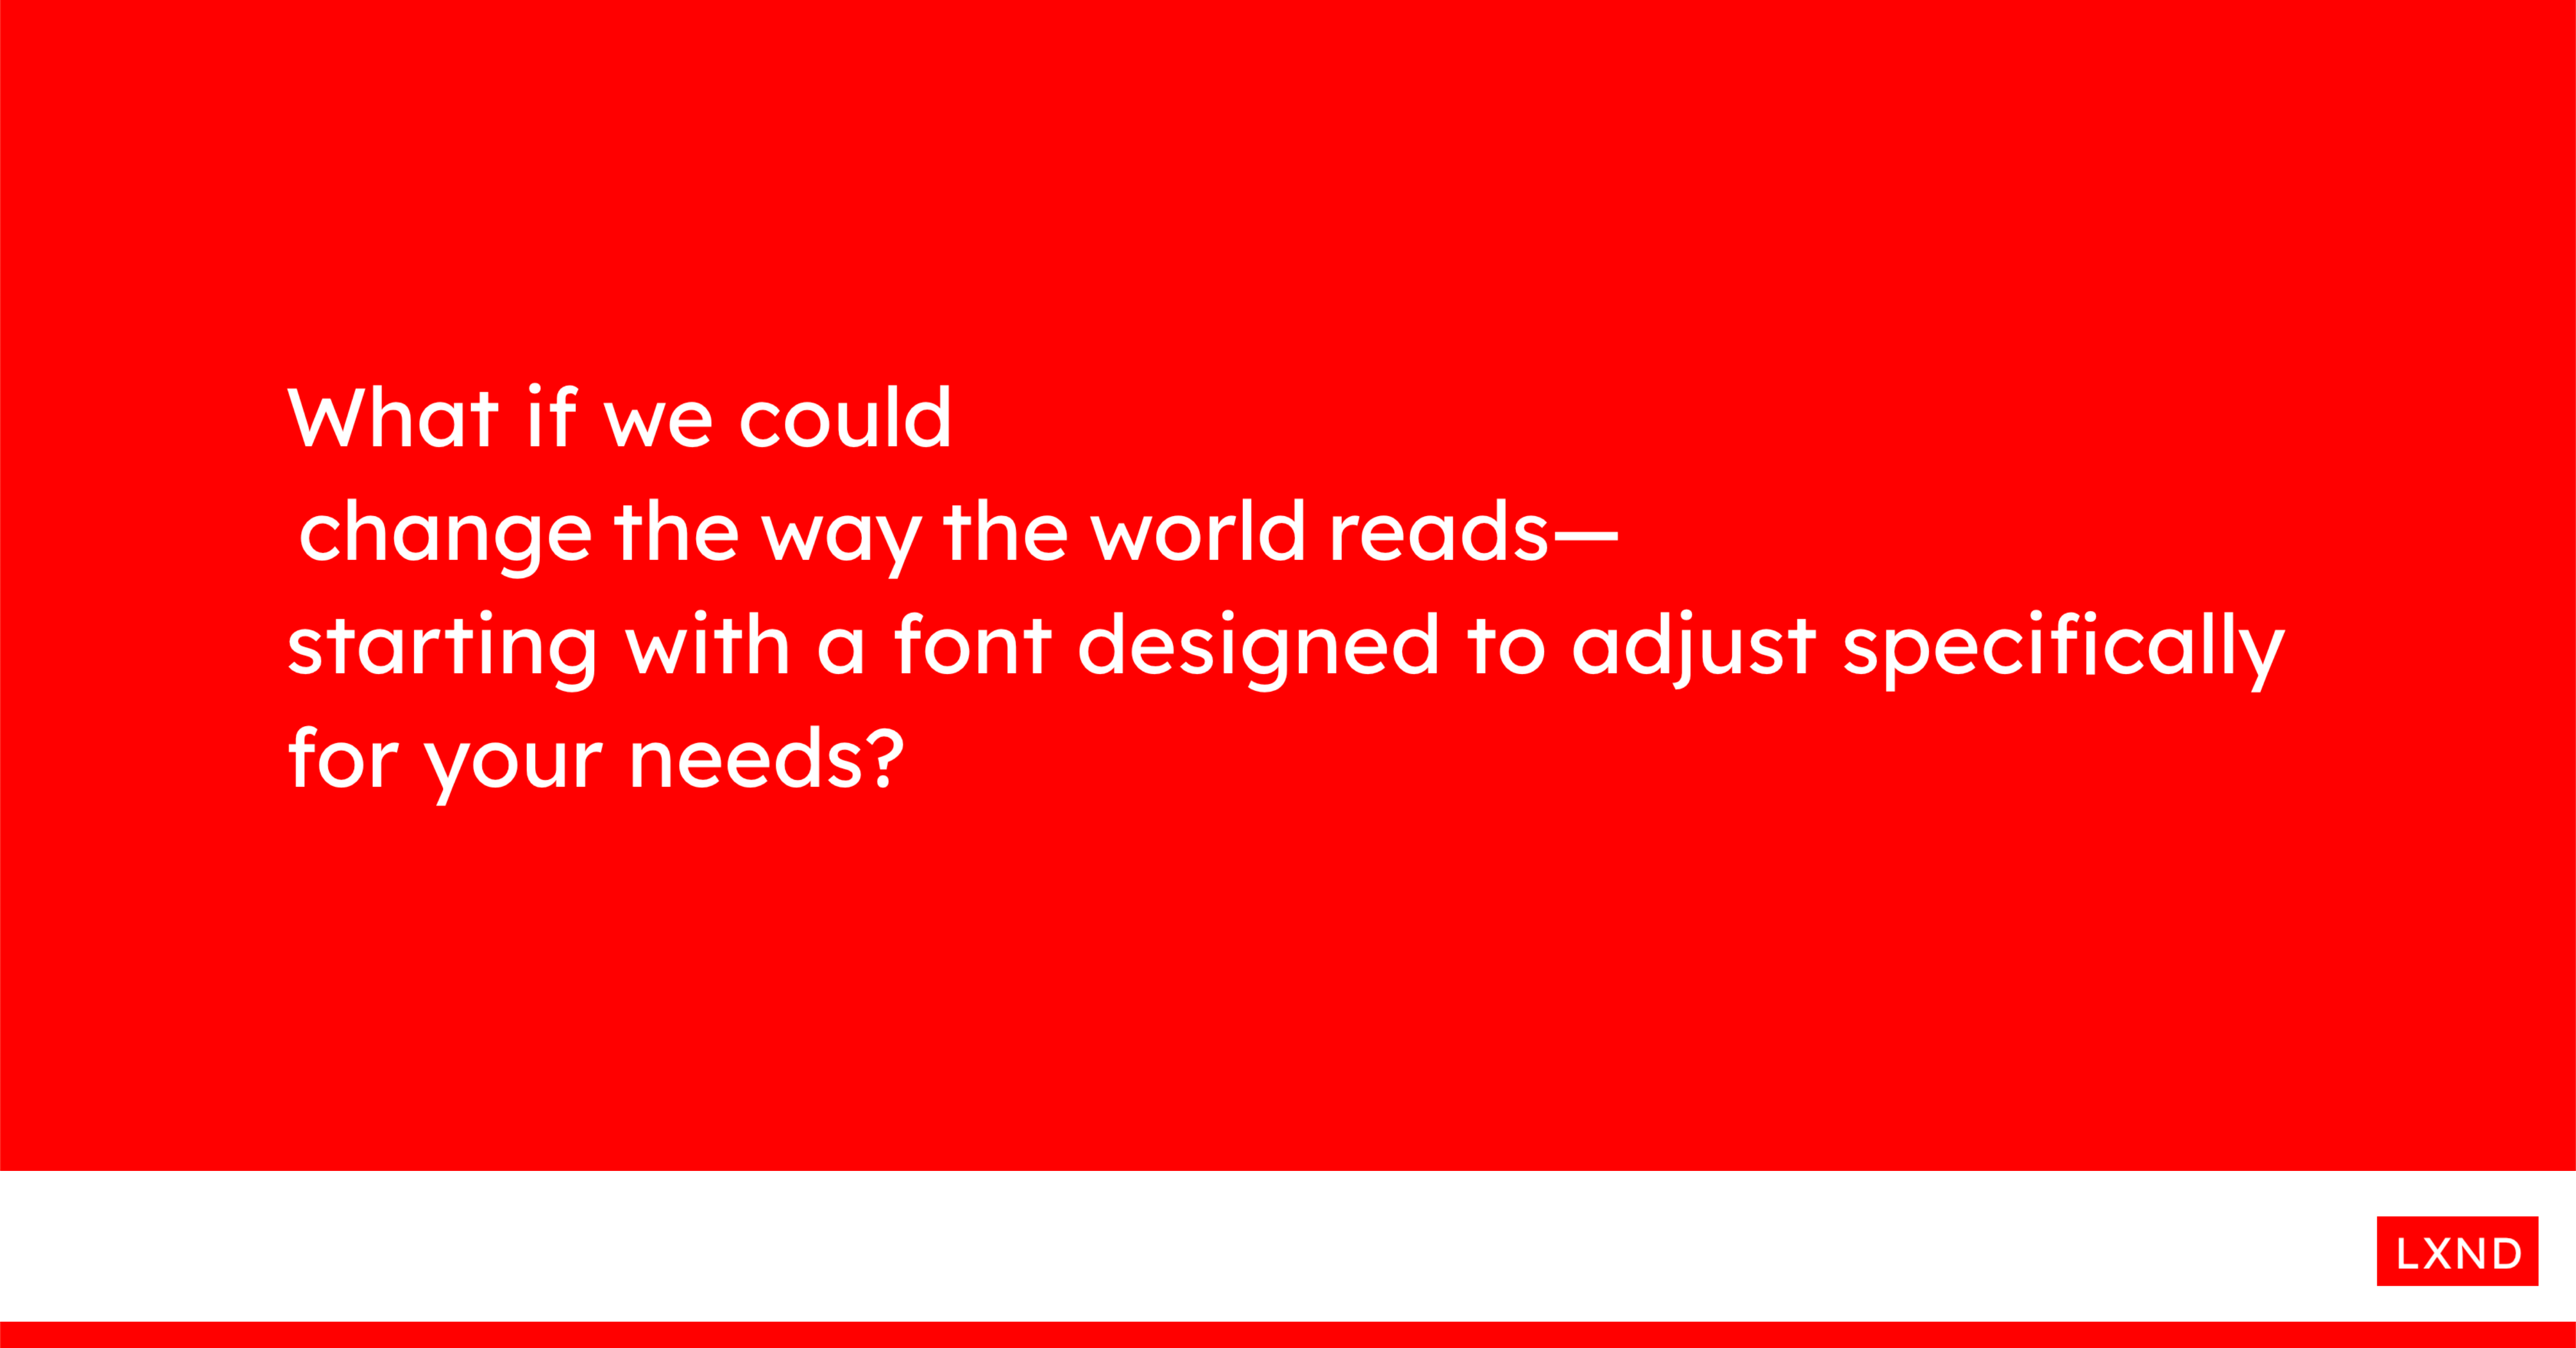 Lexend — Change the way the world reads.